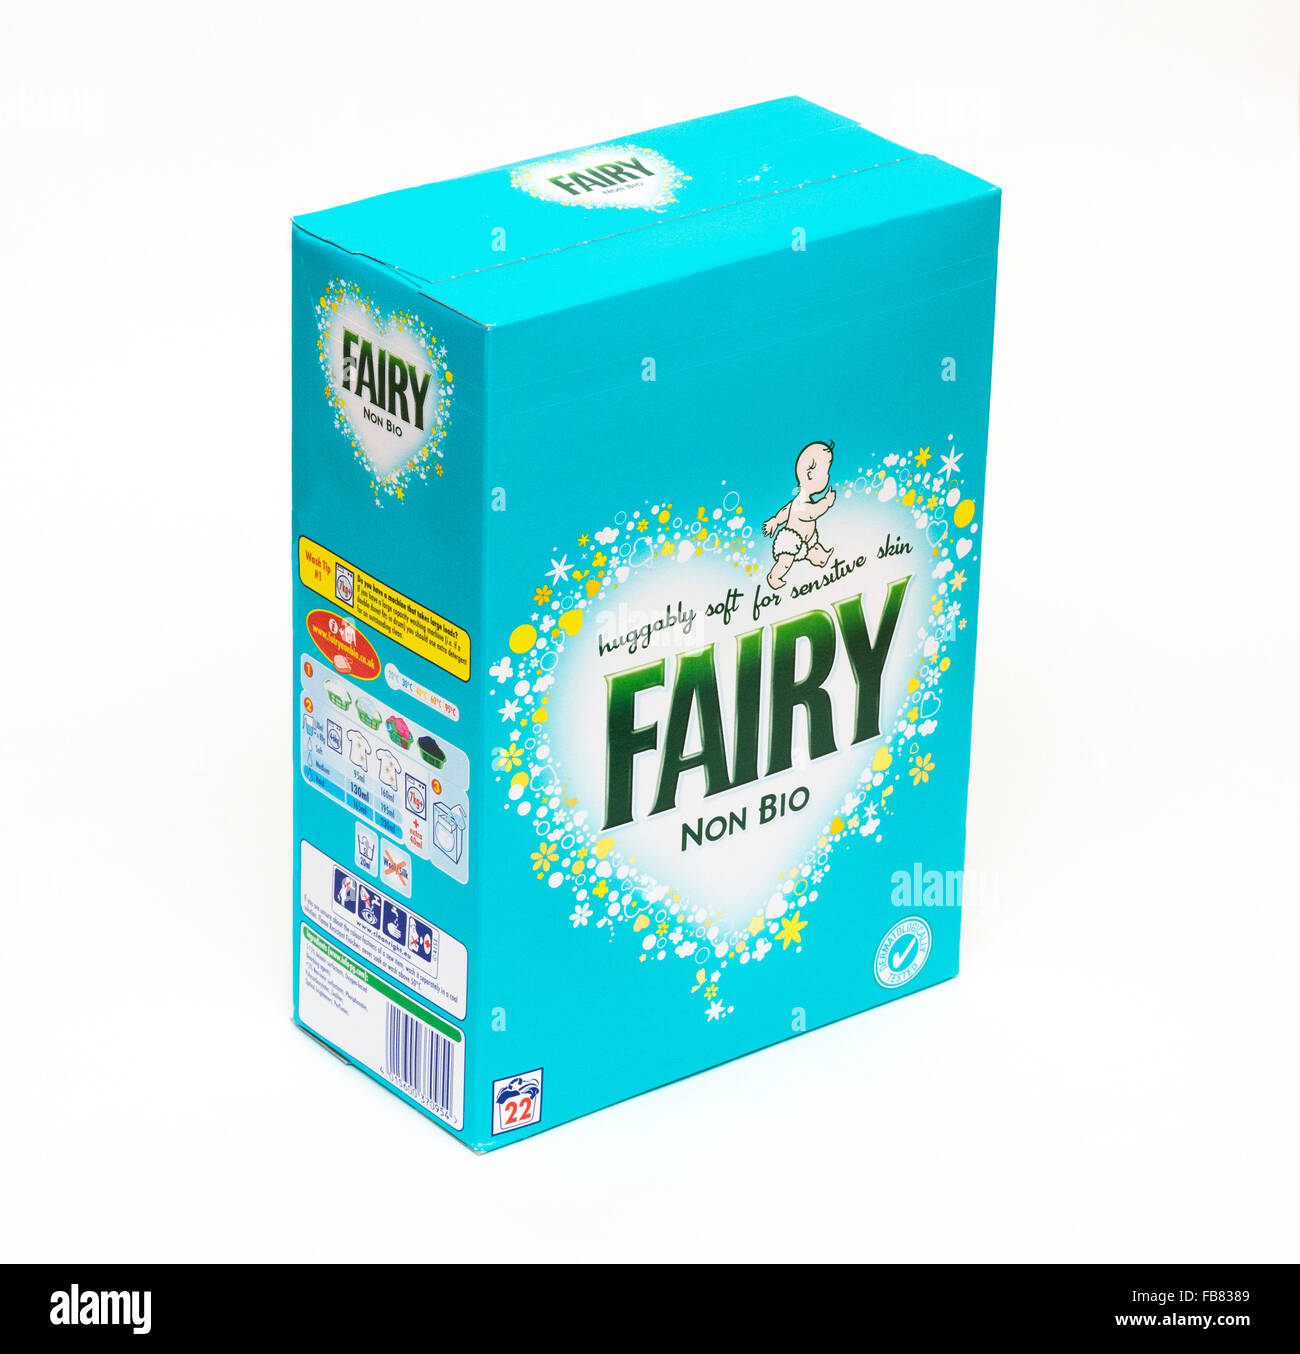 Fairy non bio washing powder made by Procter and Gamble Stock Photo